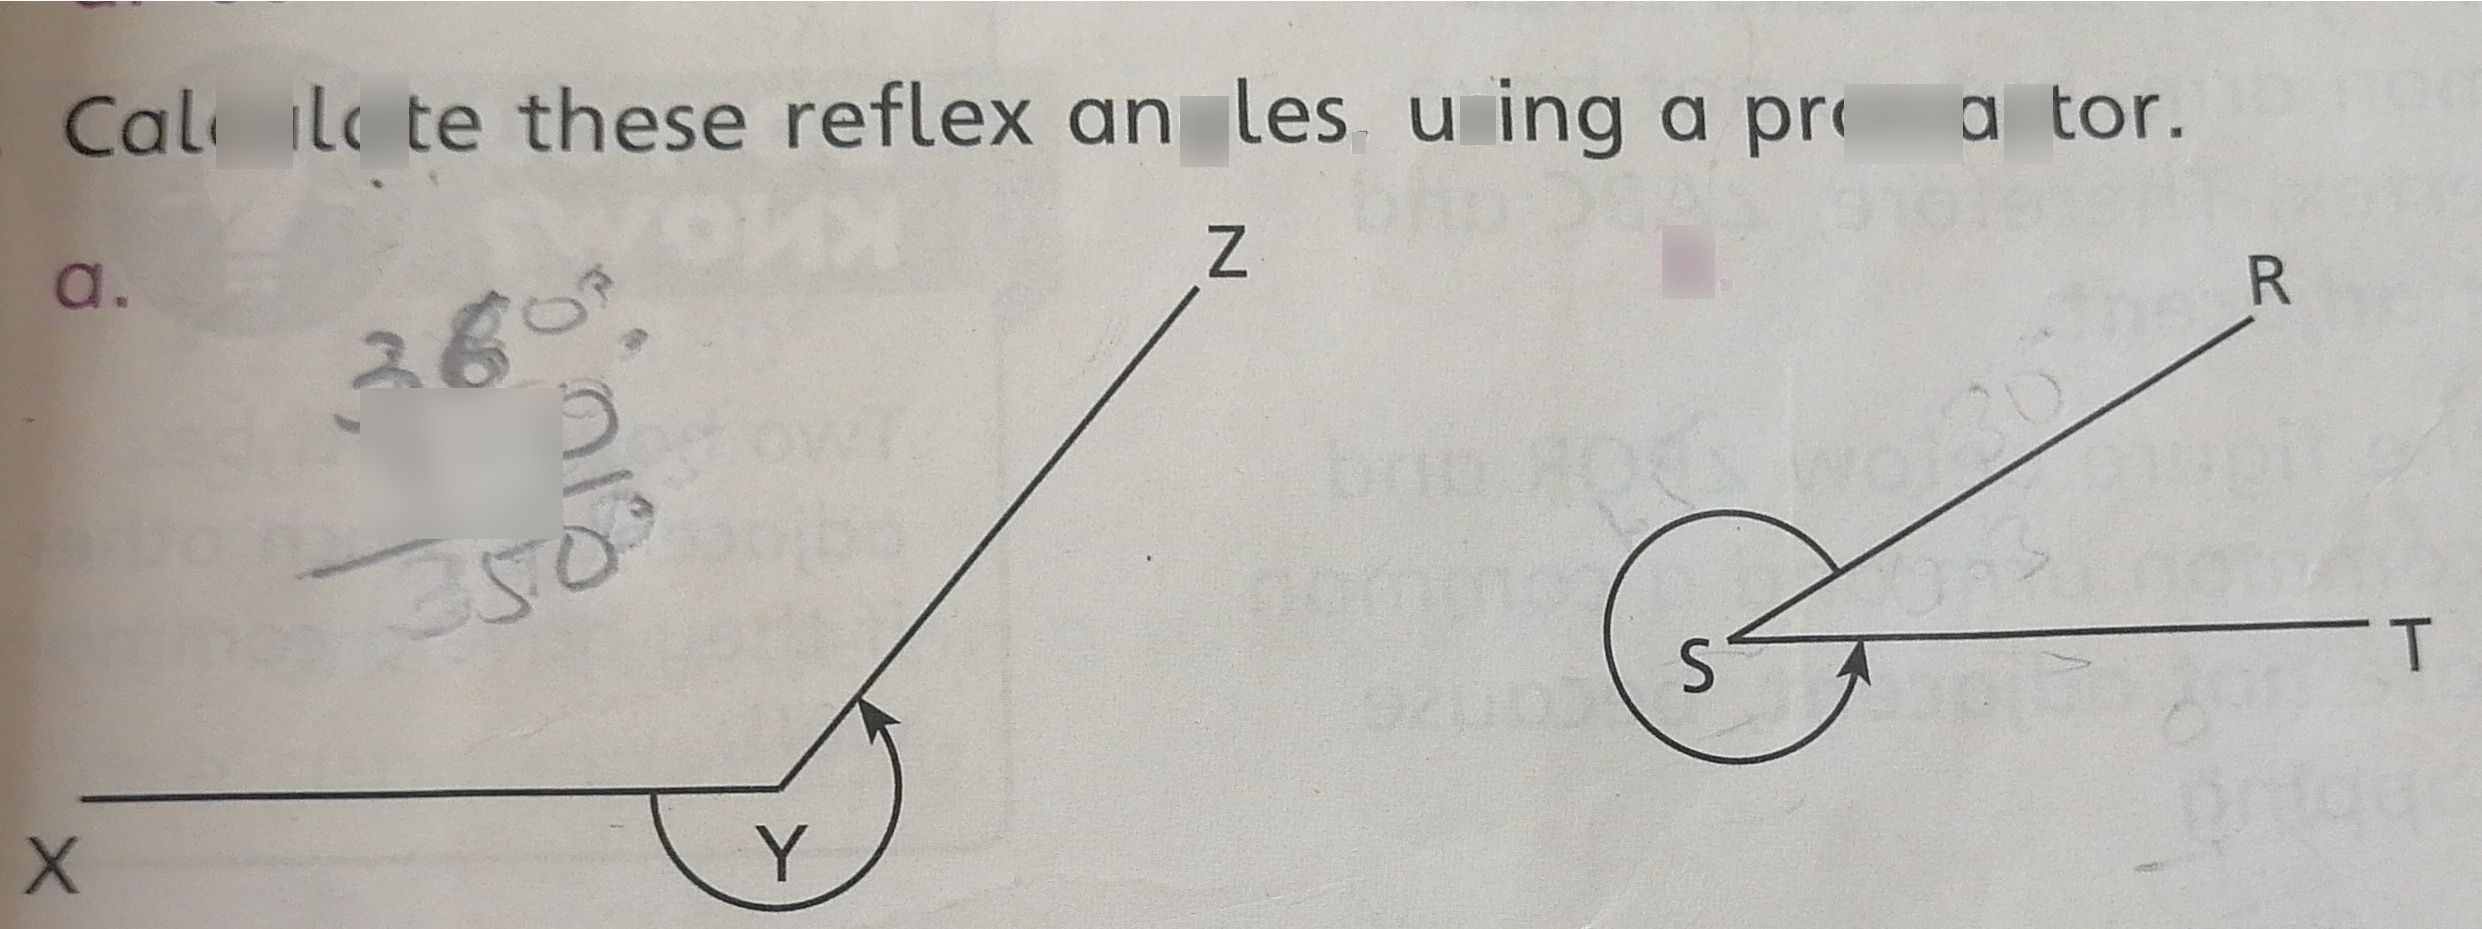 search-thumbnail-Calculate these reflex angles, using a protractor. 
$Z$ b. $R$ 
a. $360^{4}$ 
$3\dfrac {1^{0}} {5^{0}}$ ba 130 
$S$ $A$ $T$ 
$X$ $V$ 